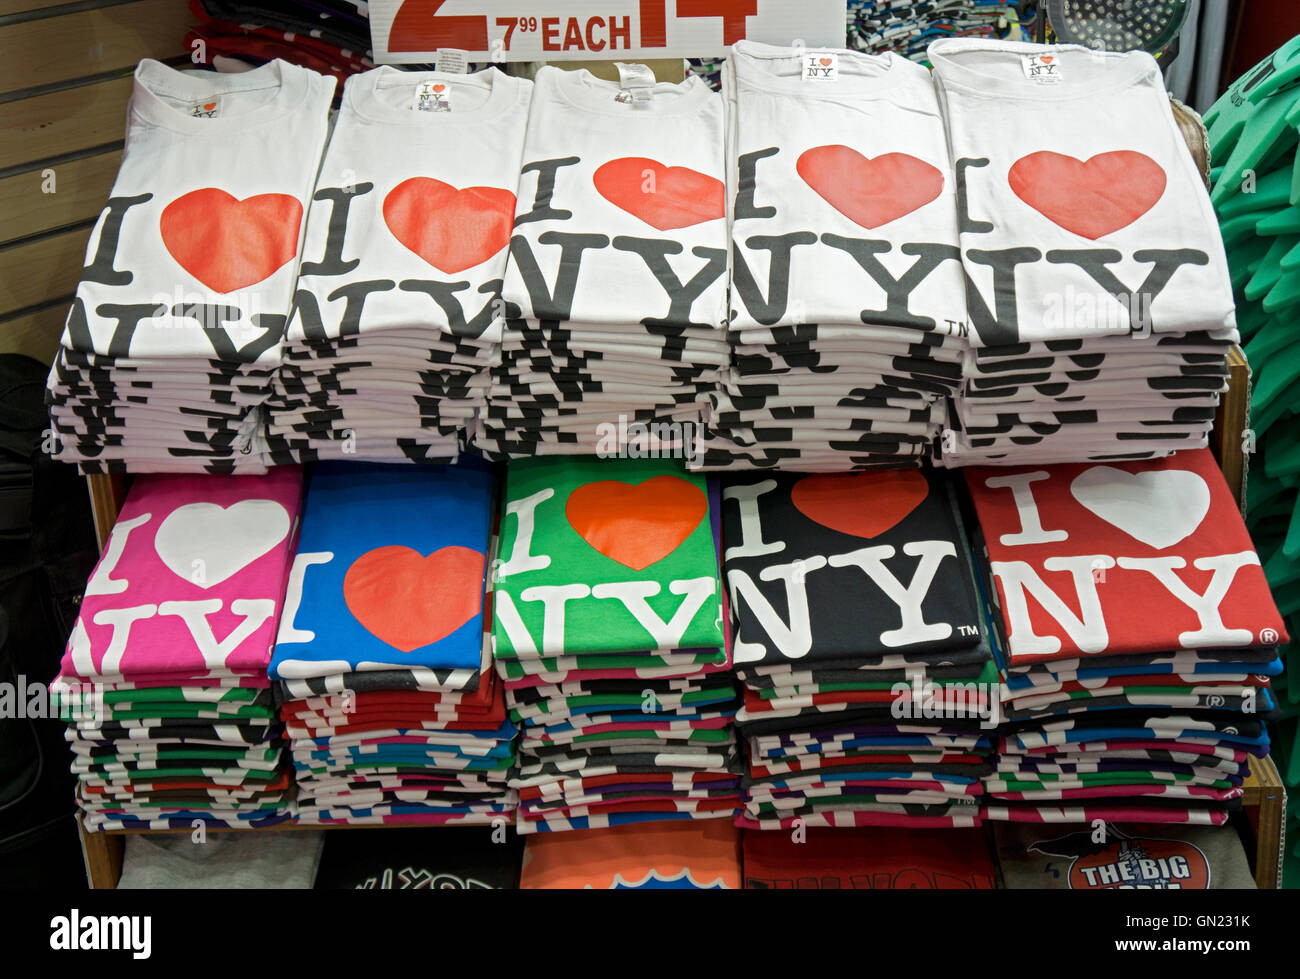 A tourist gift shop in the Times Square section of Midtown Manhattan, New York City selling inexpensive t-shirts to visitors. Stock Photo